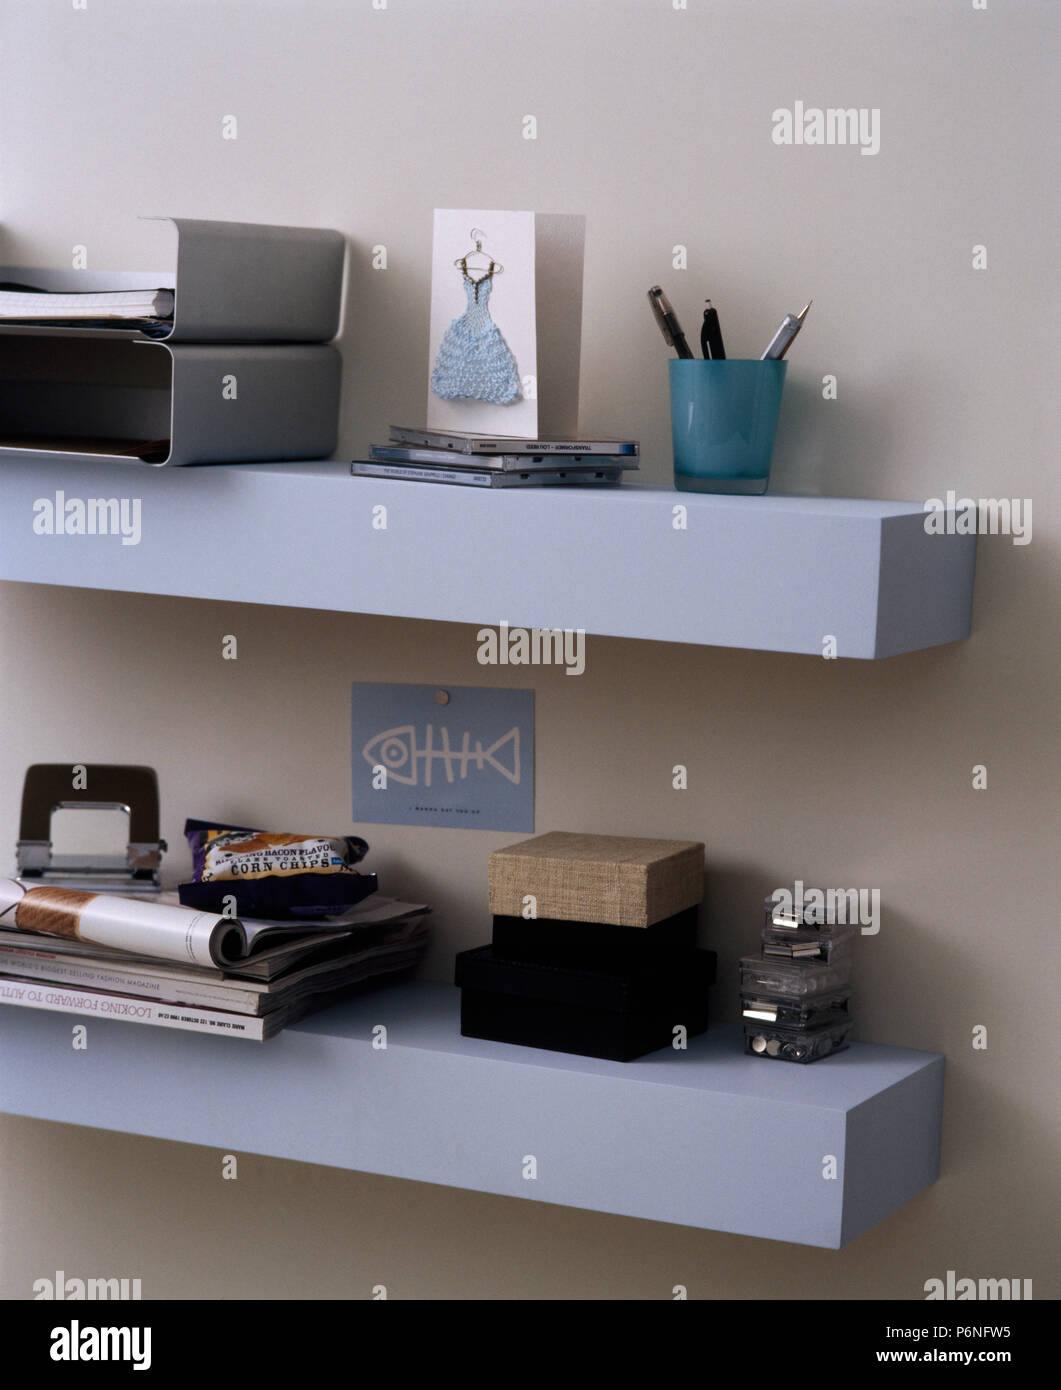 Metal file trays and stationery equipment on simple pale blue shelving Stock Photo